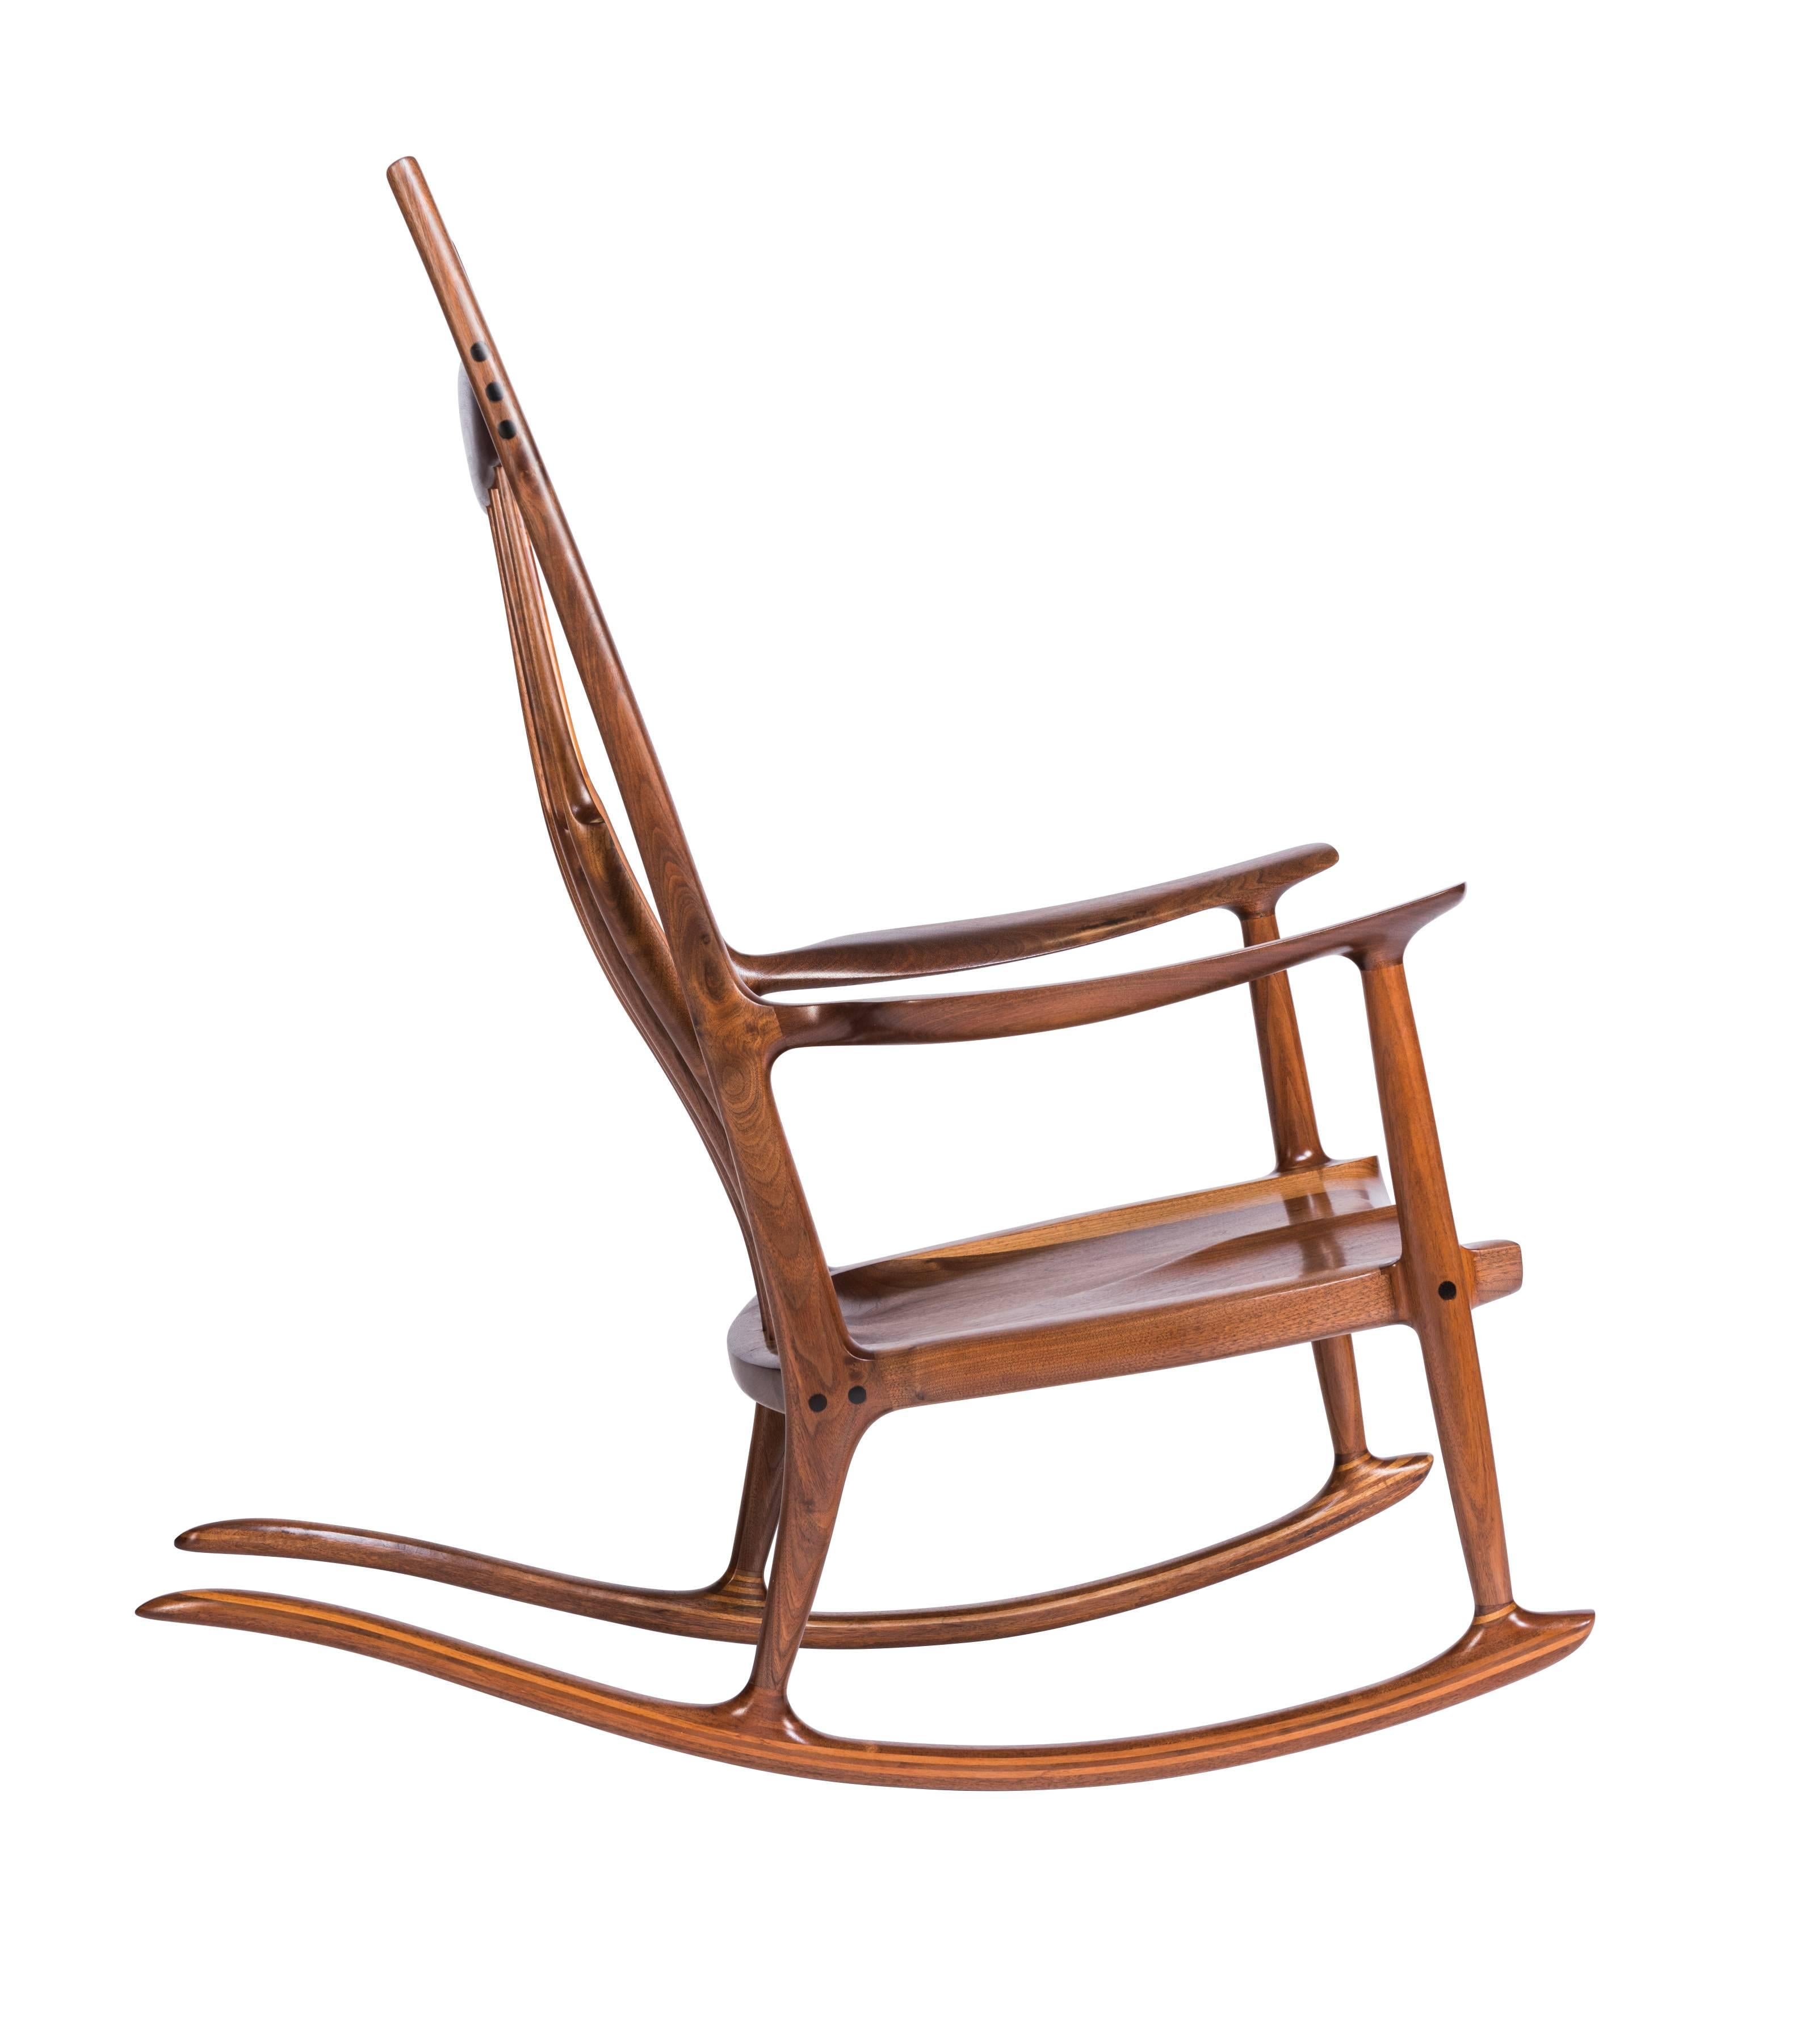 A perfect and unique example by noted California woodworker Sam Maloof. His iconic rocker defined his work and were made for two U.S. Presidents and dignitaries globally. Constructed in walnut with ebony inlay, creating a beautiful contrast of